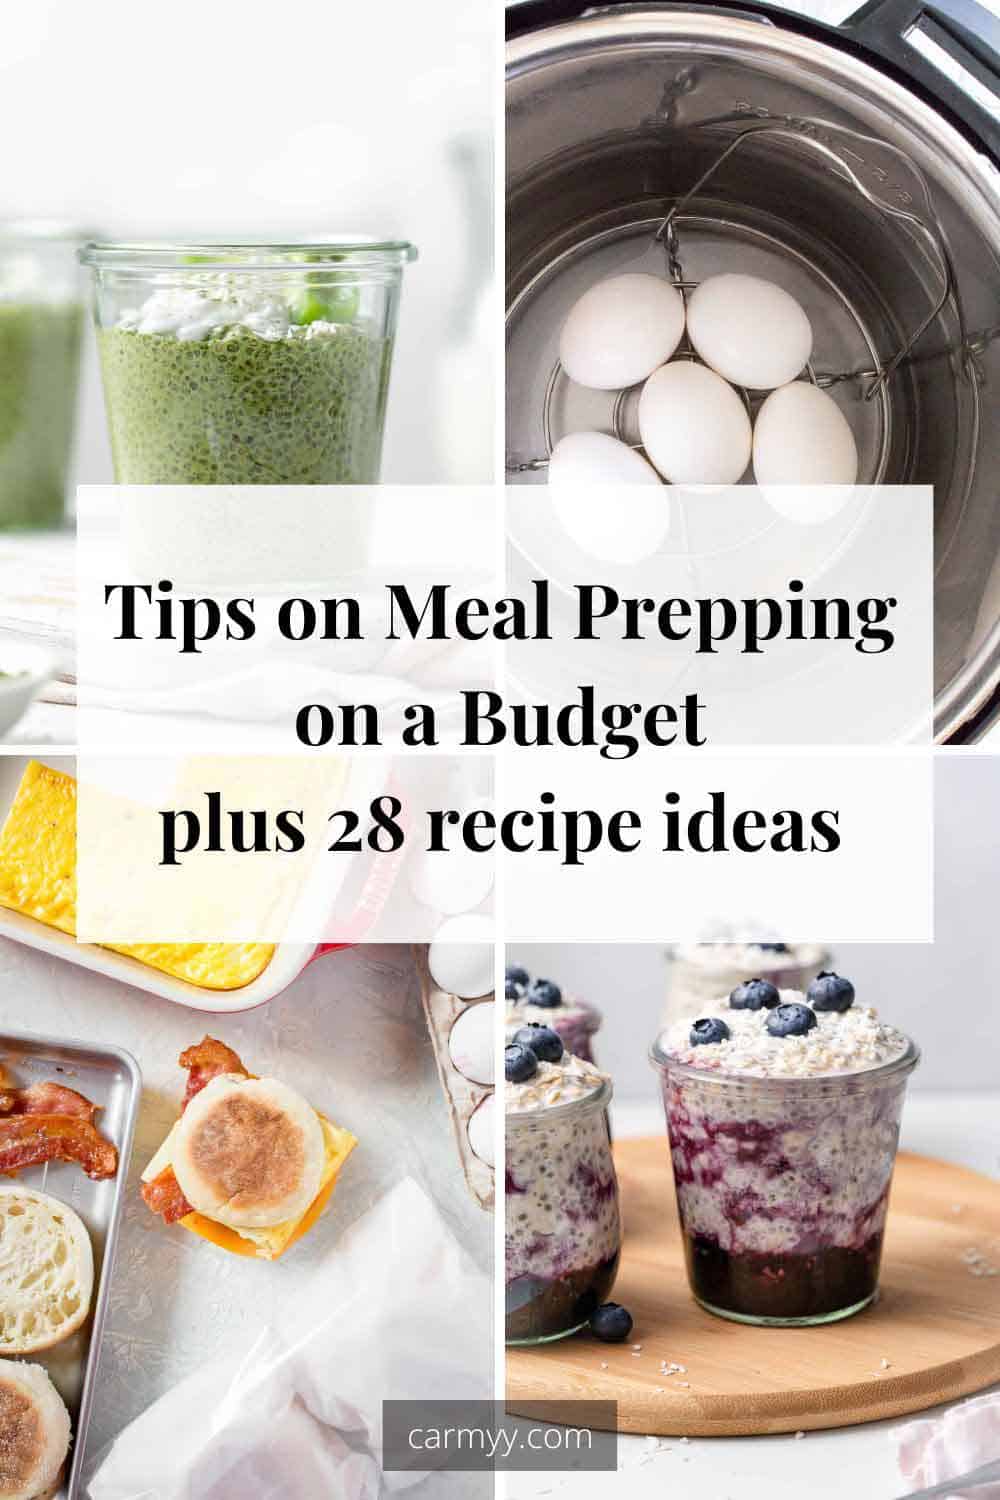 Meal prepping on a budget? Check out these tips for meal prepping on a budget and 28 recipes to help you stay on budget!